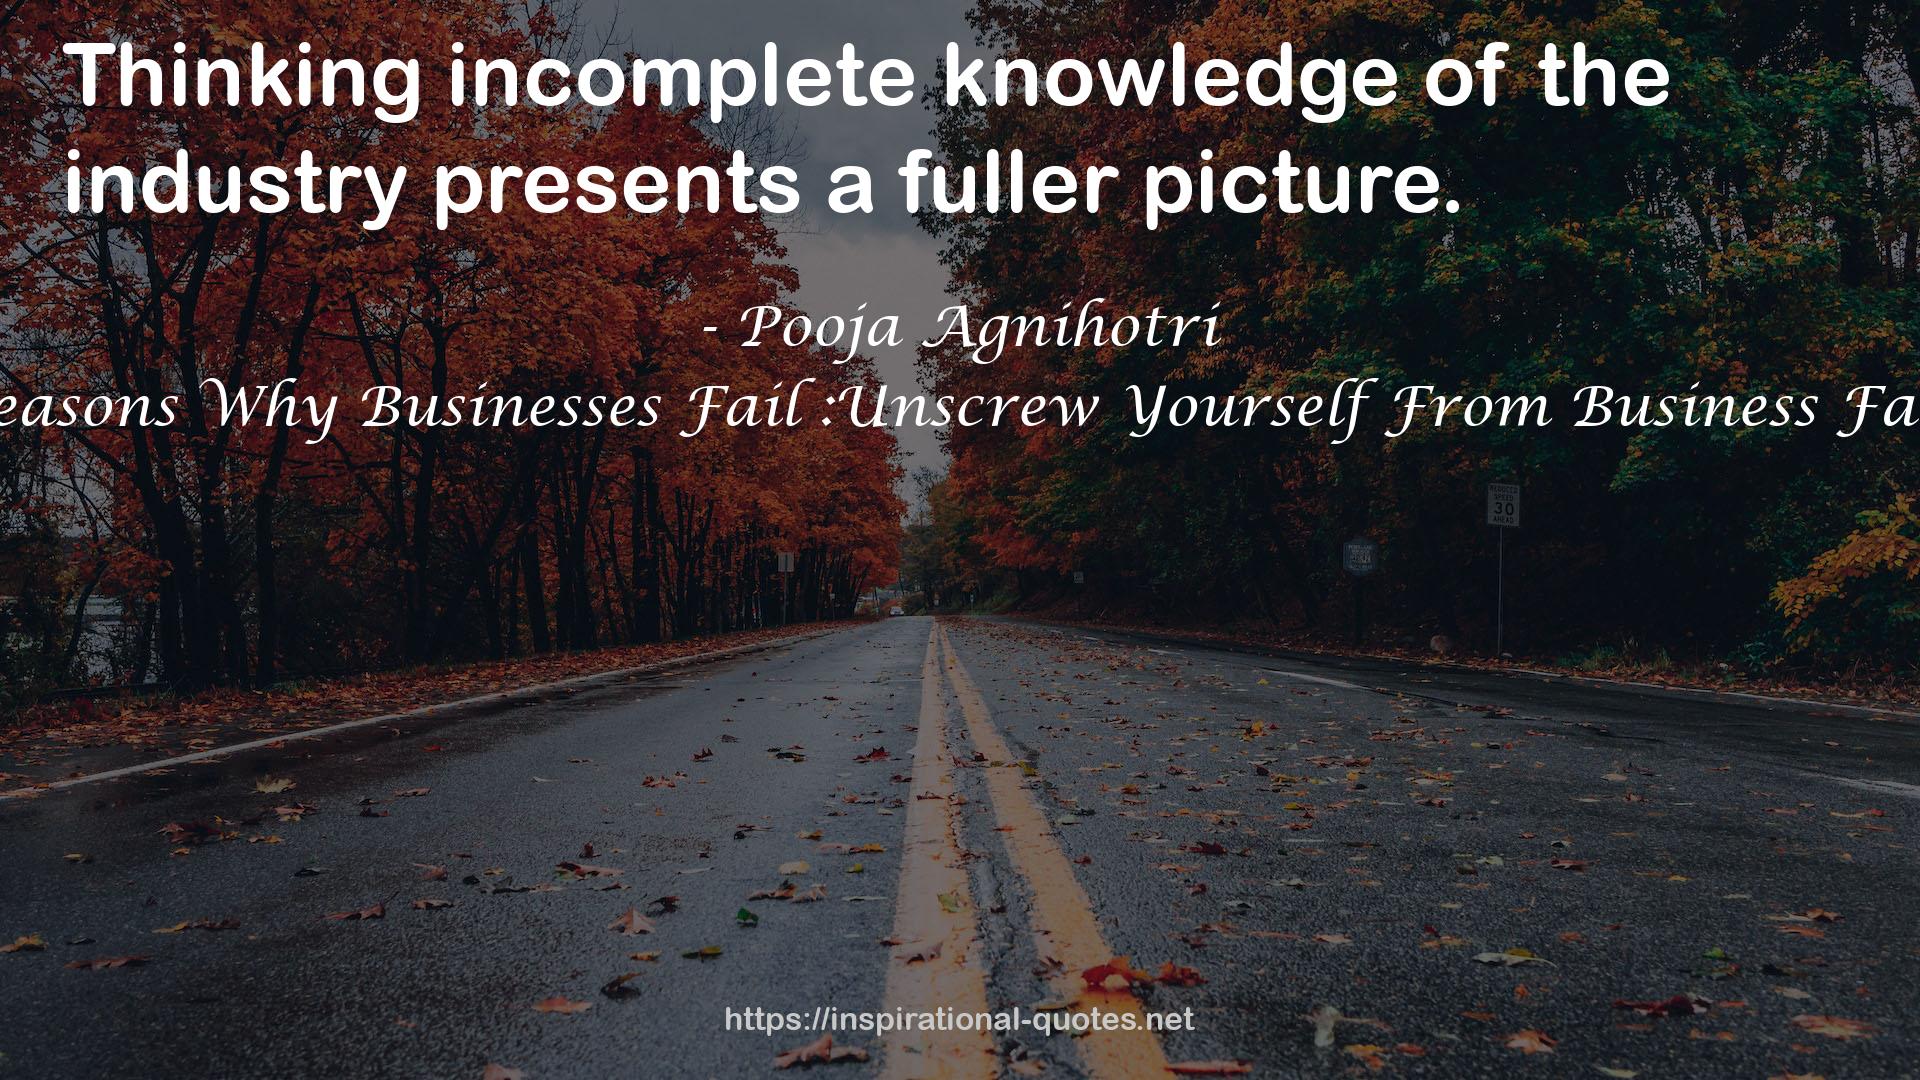 17 Reasons Why Businesses Fail :Unscrew Yourself From Business Failure QUOTES